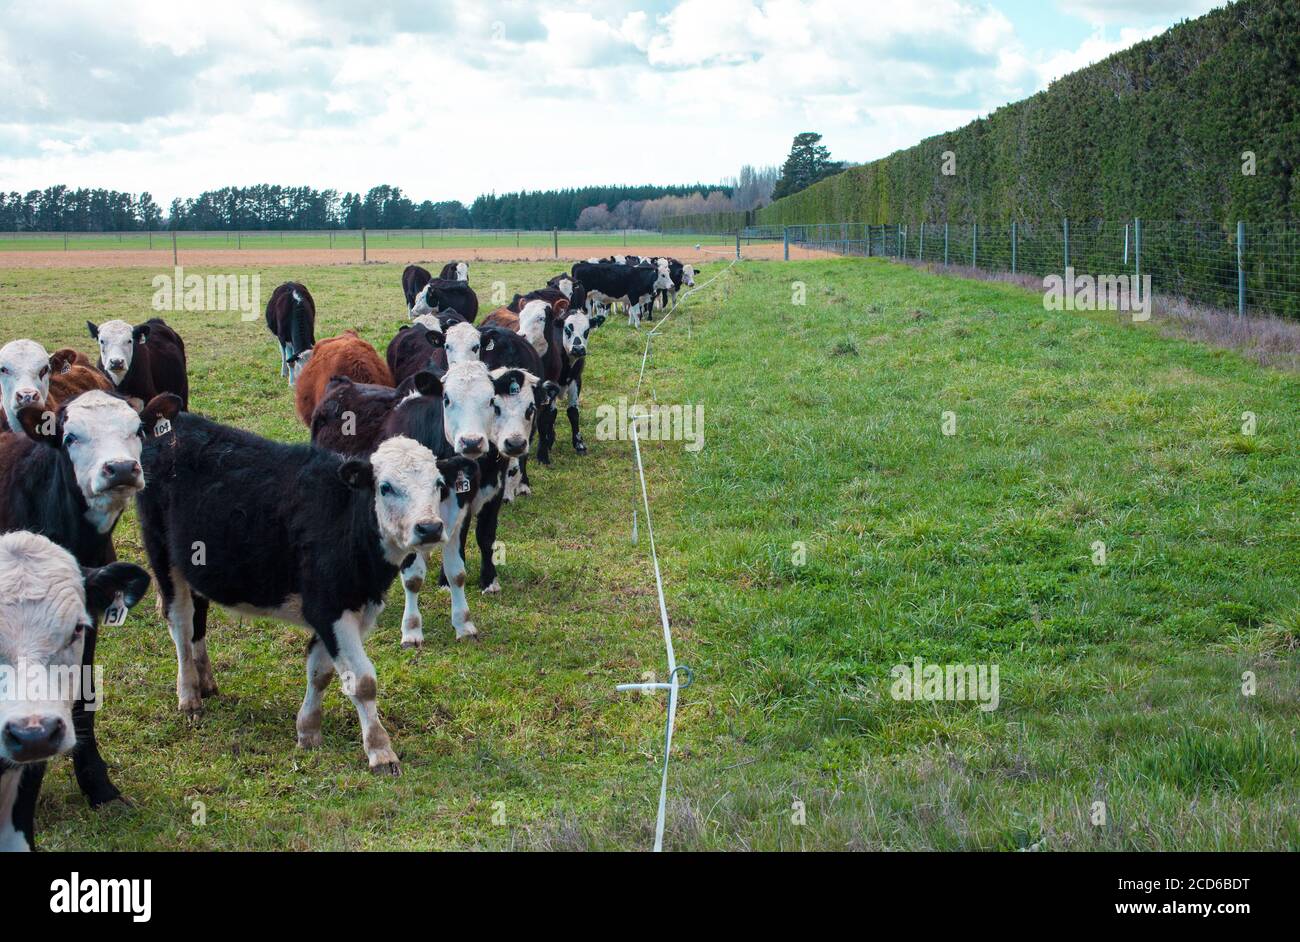 New Zealand Countryside: iconic kiwi sights: herds of cattle and strip-feeding. Stock Photo